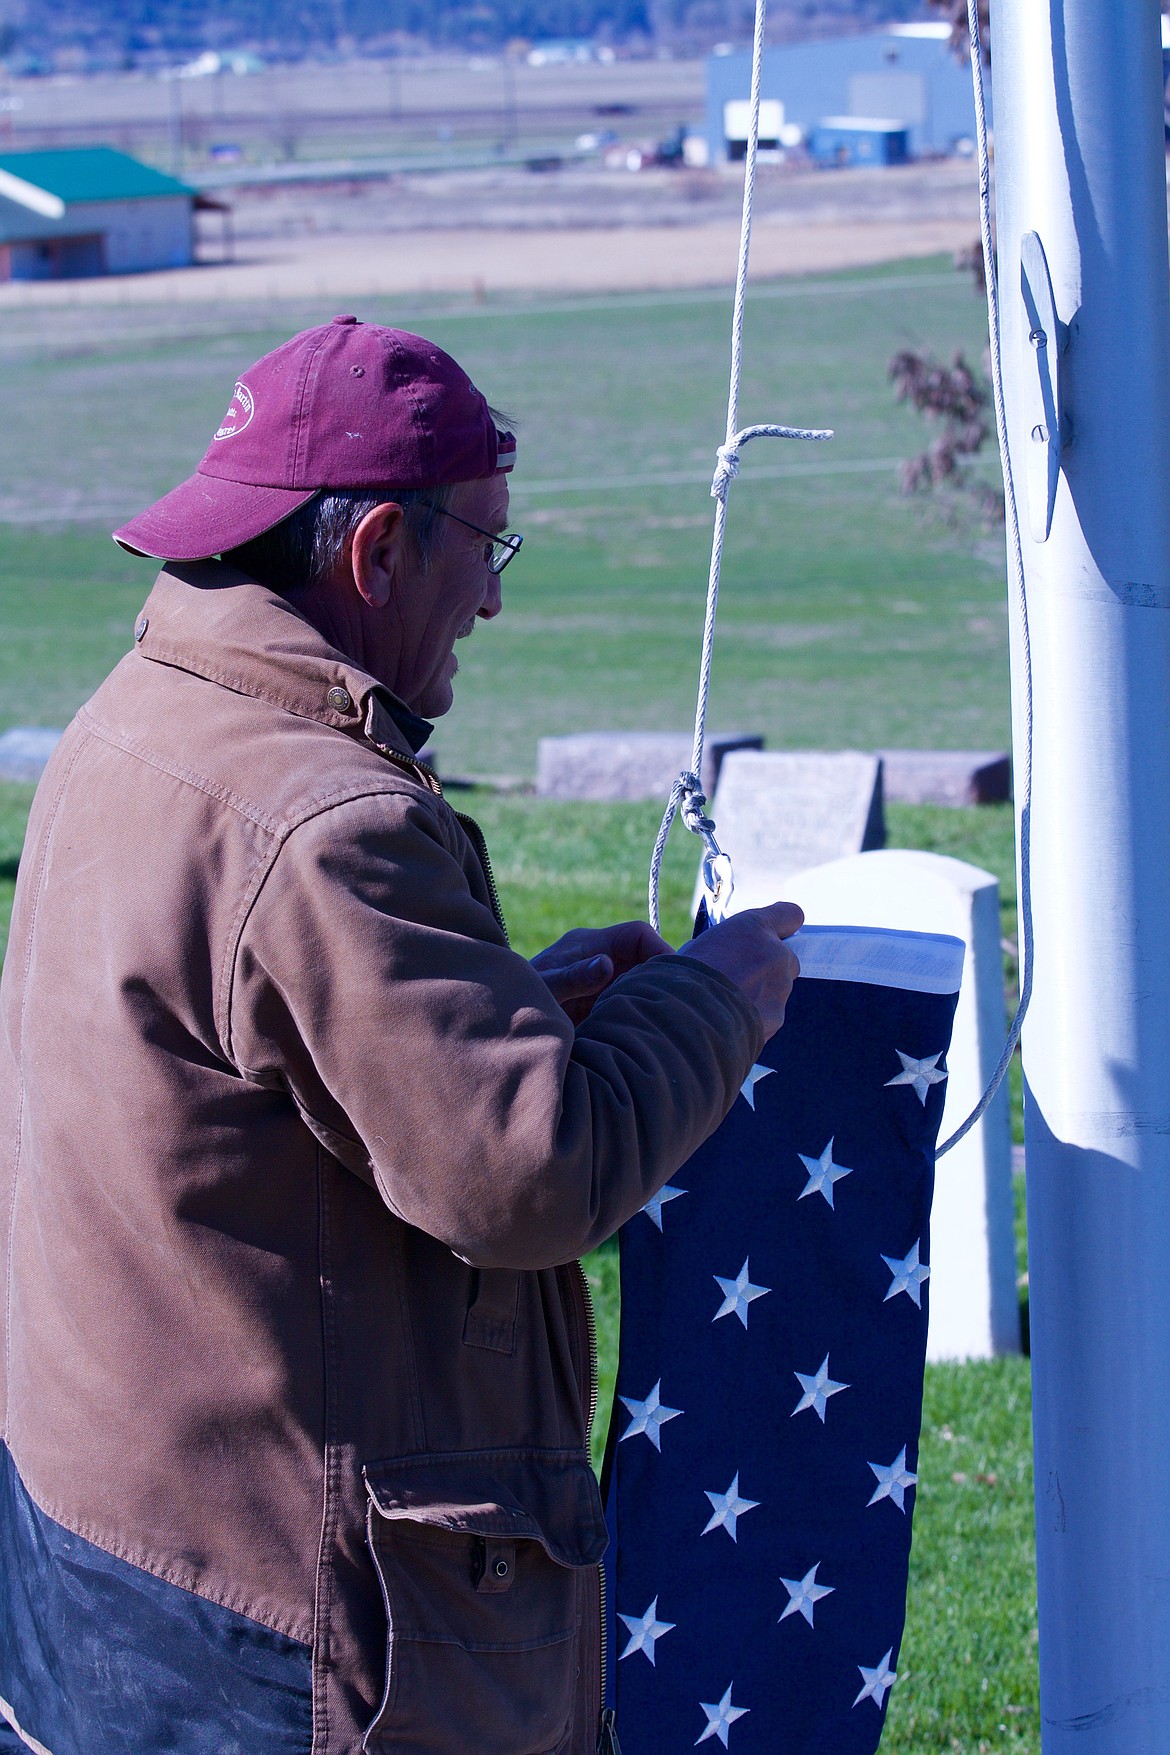 PLAINS CEMETERY sexton Ken Jones works with the American flag to raise it on the rope and flagpole.